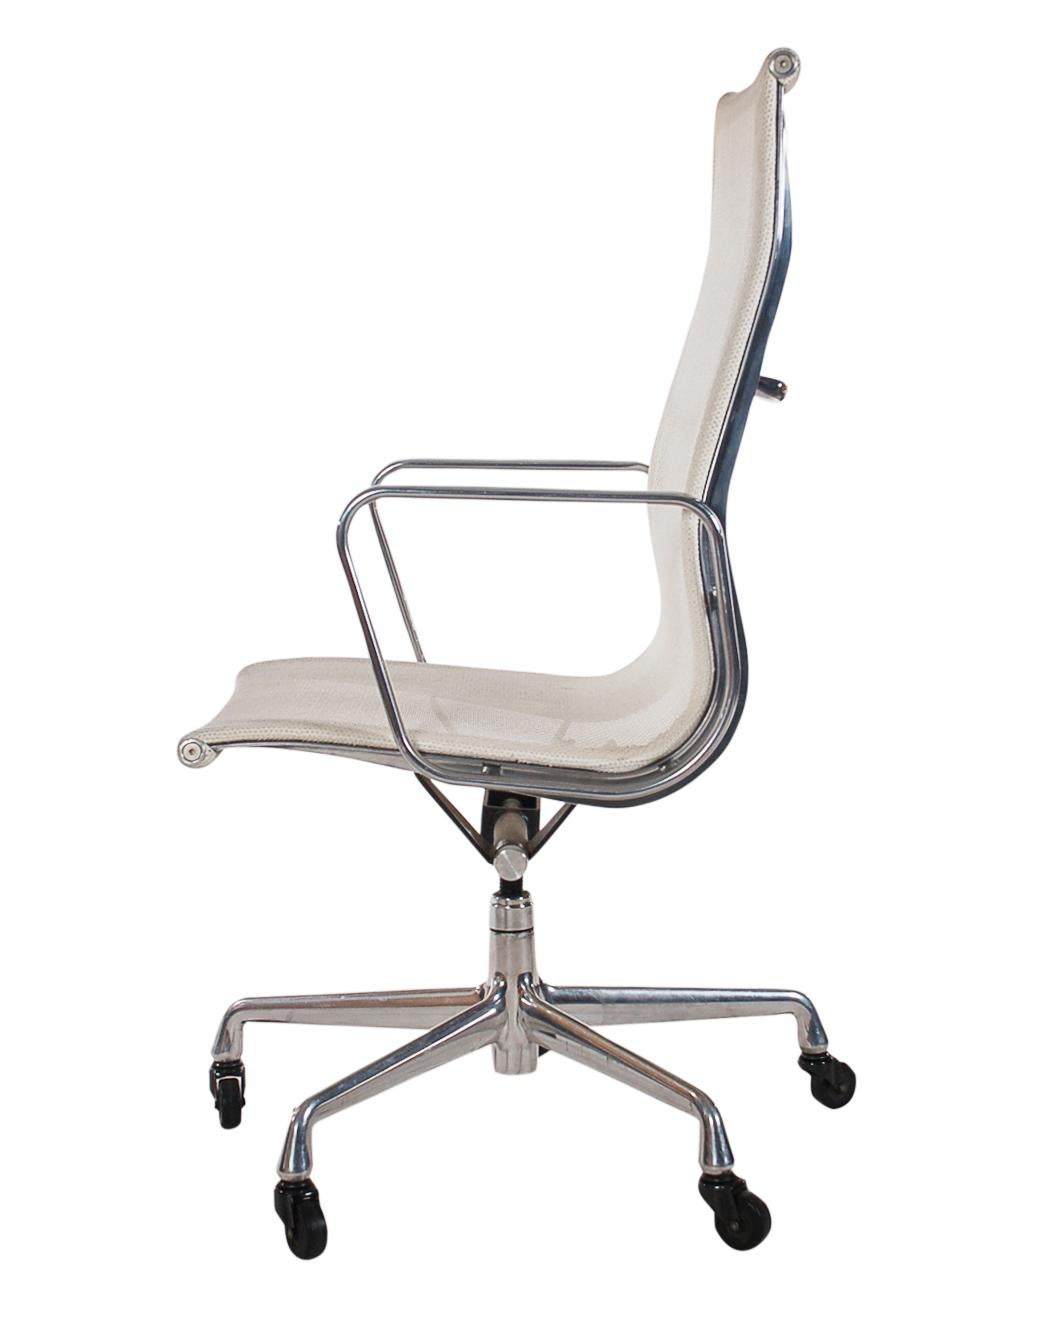 A Classic design by Charles Eames and produced by Herman Miller. This chair features an adjustable aluminum frame, casters for easy tasking, and a white mesh sling seating area. Extremely comfortable. 